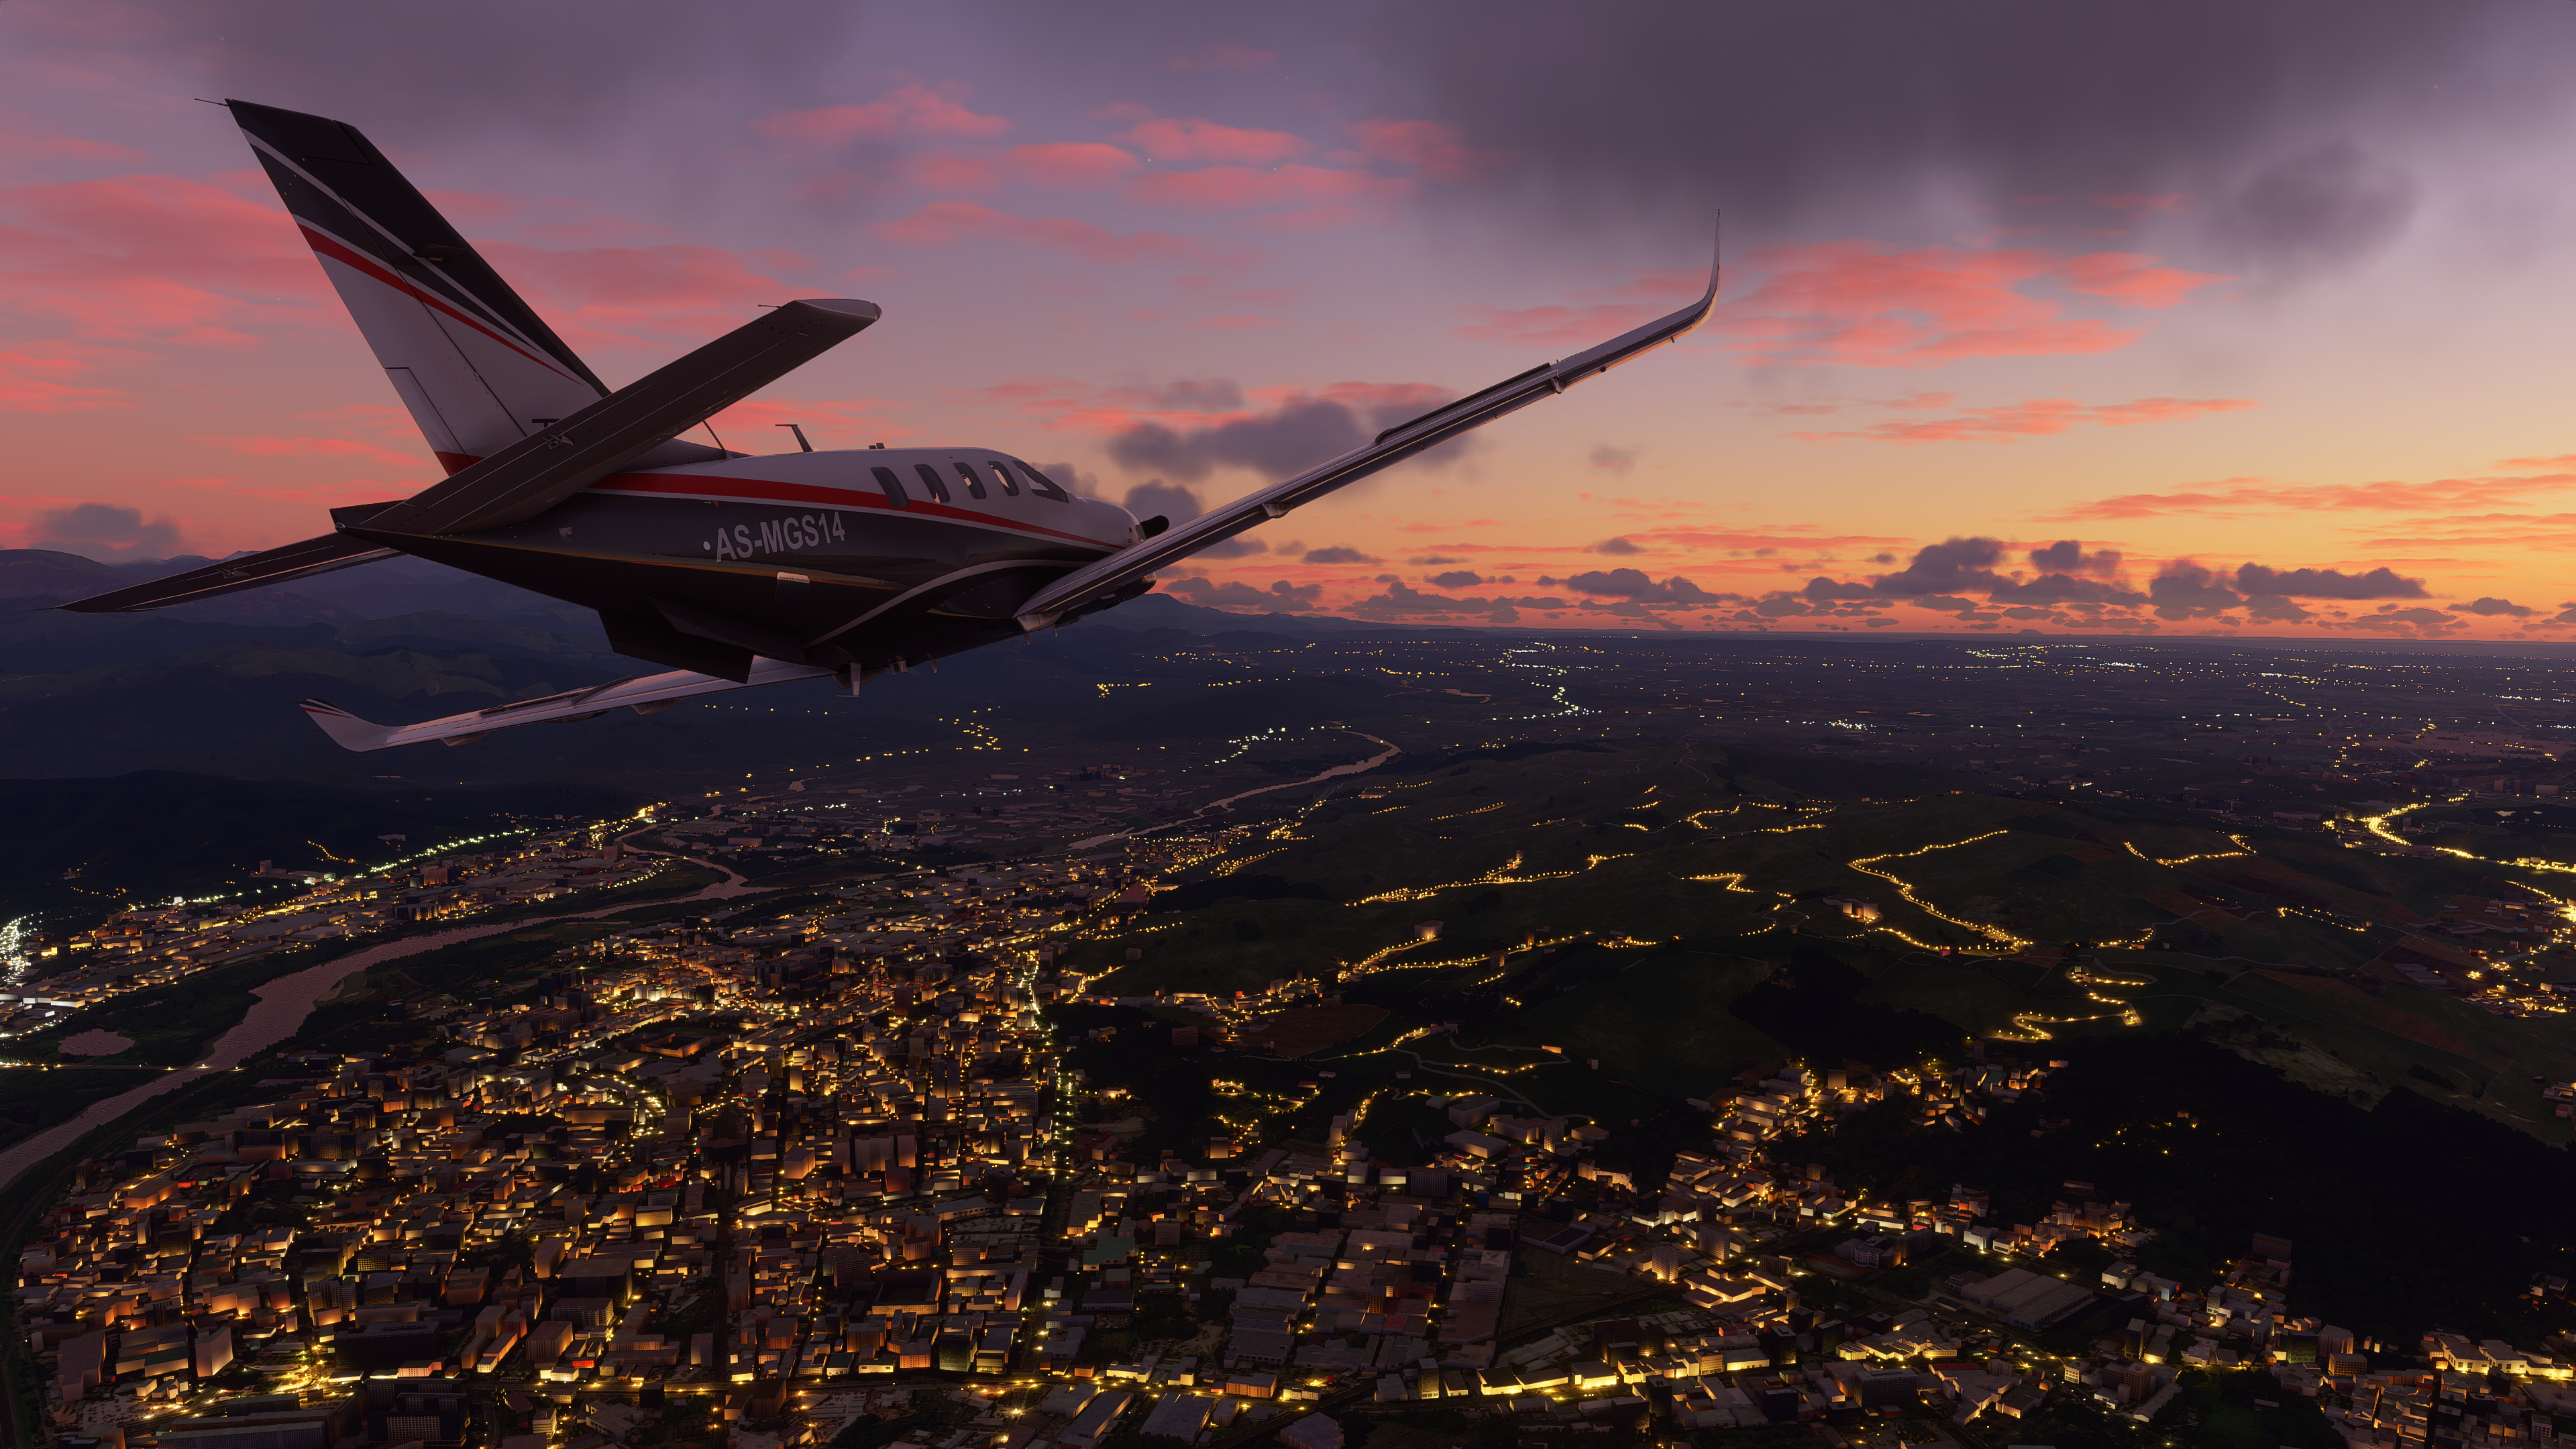 Microsoft Flight Simulator is landing on Xbox Series X / S consoles on July  27th - The Verge